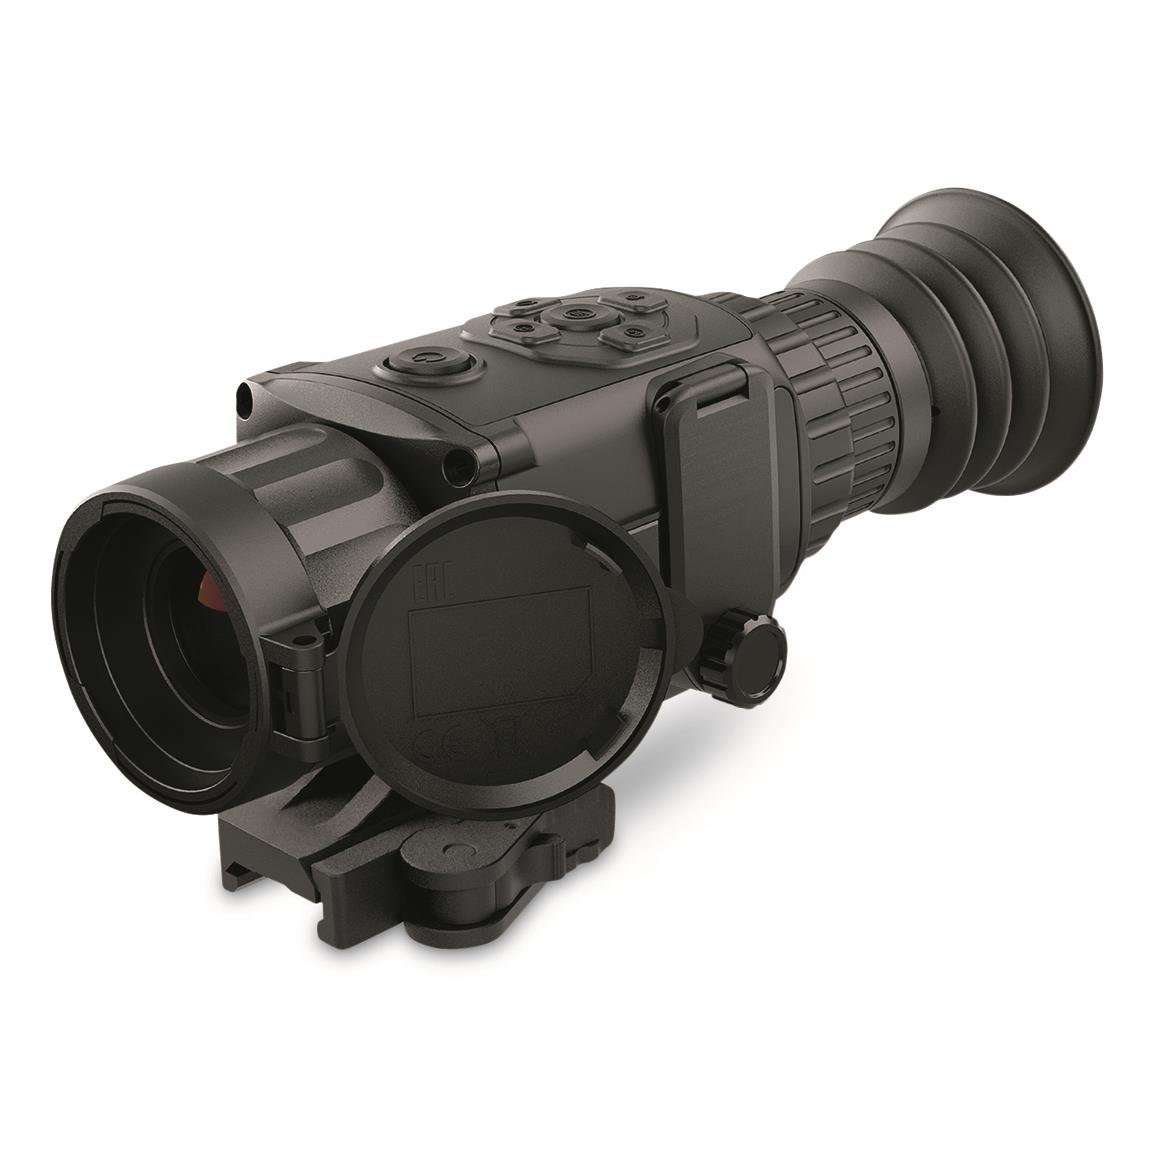 AGM Rattler TS35-640 2-16x35mm Compact Thermal Imaging Rifle Scope